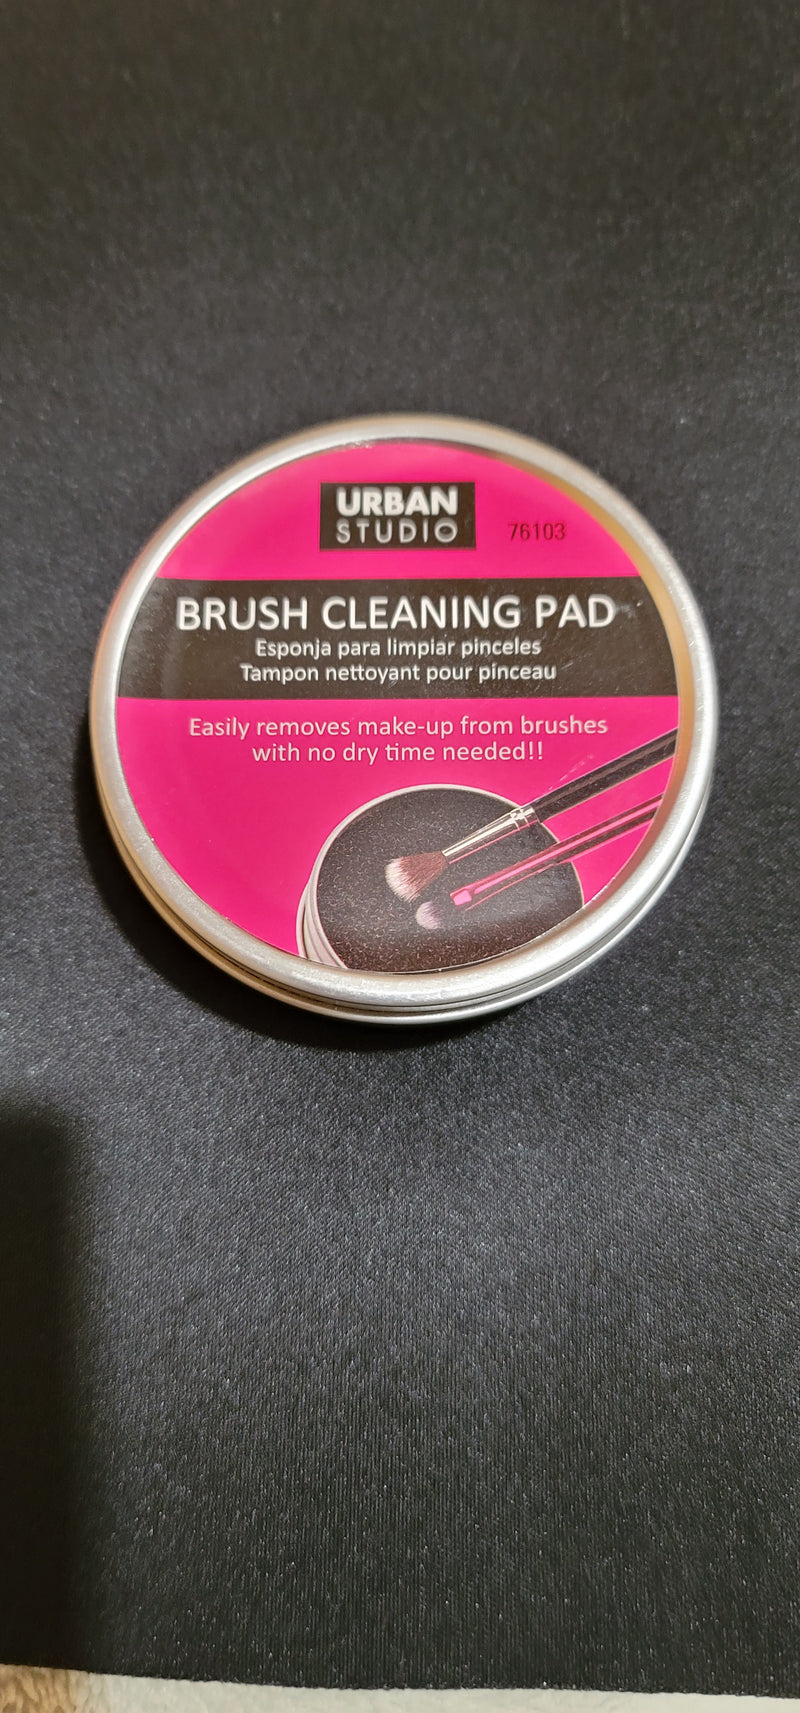 Brush cleaning pad